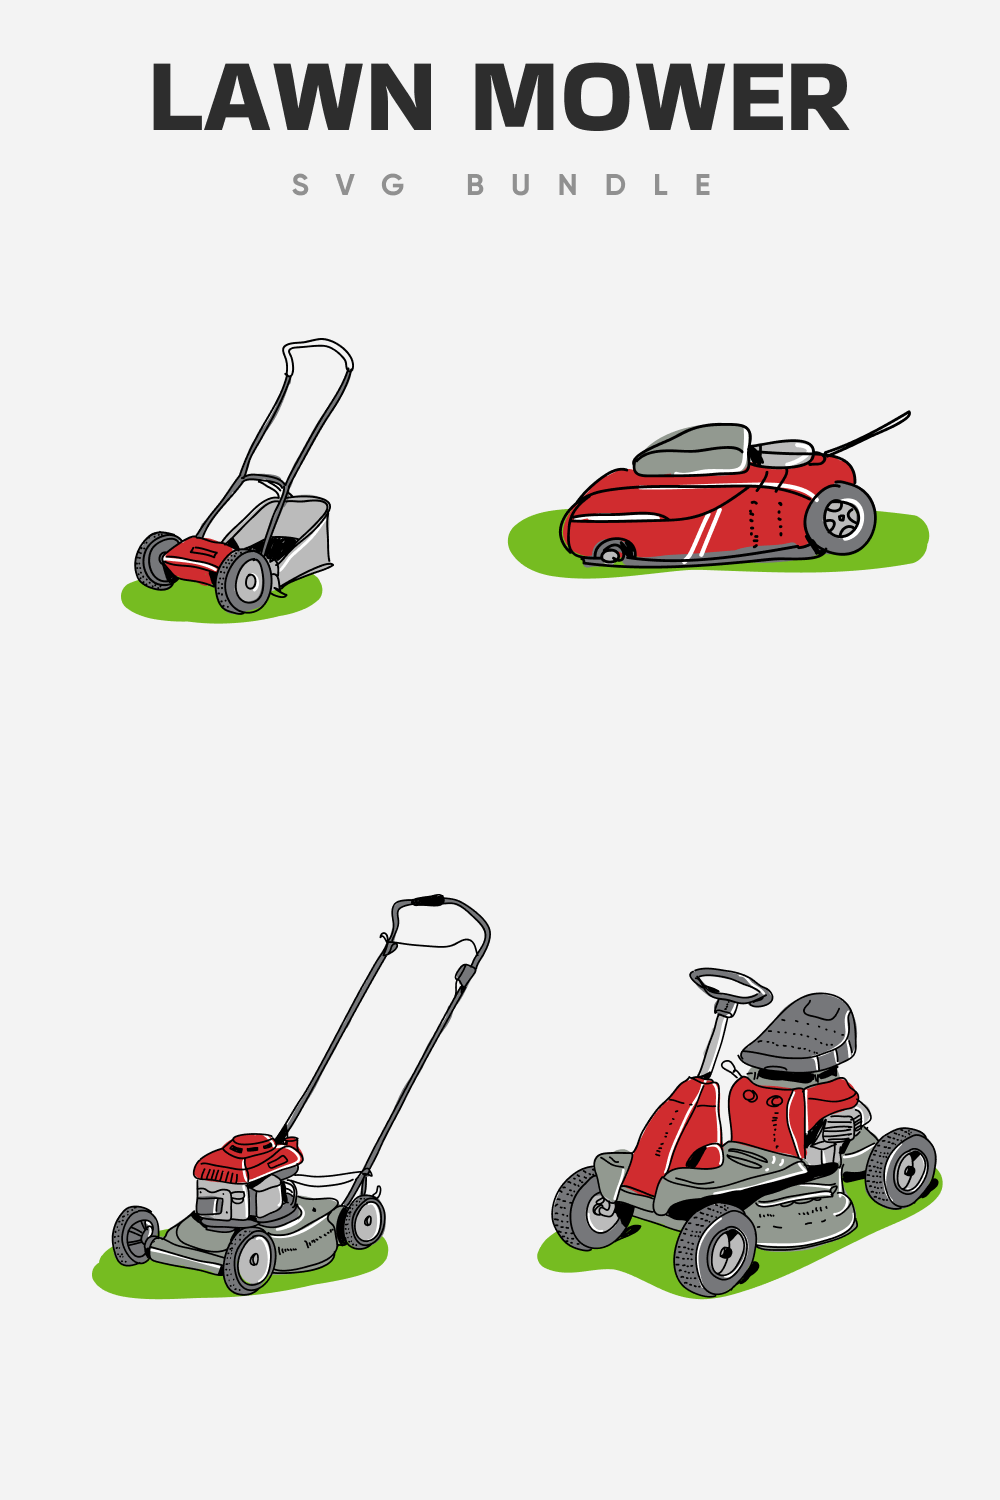 Drawn lawn mowers in different assembly.